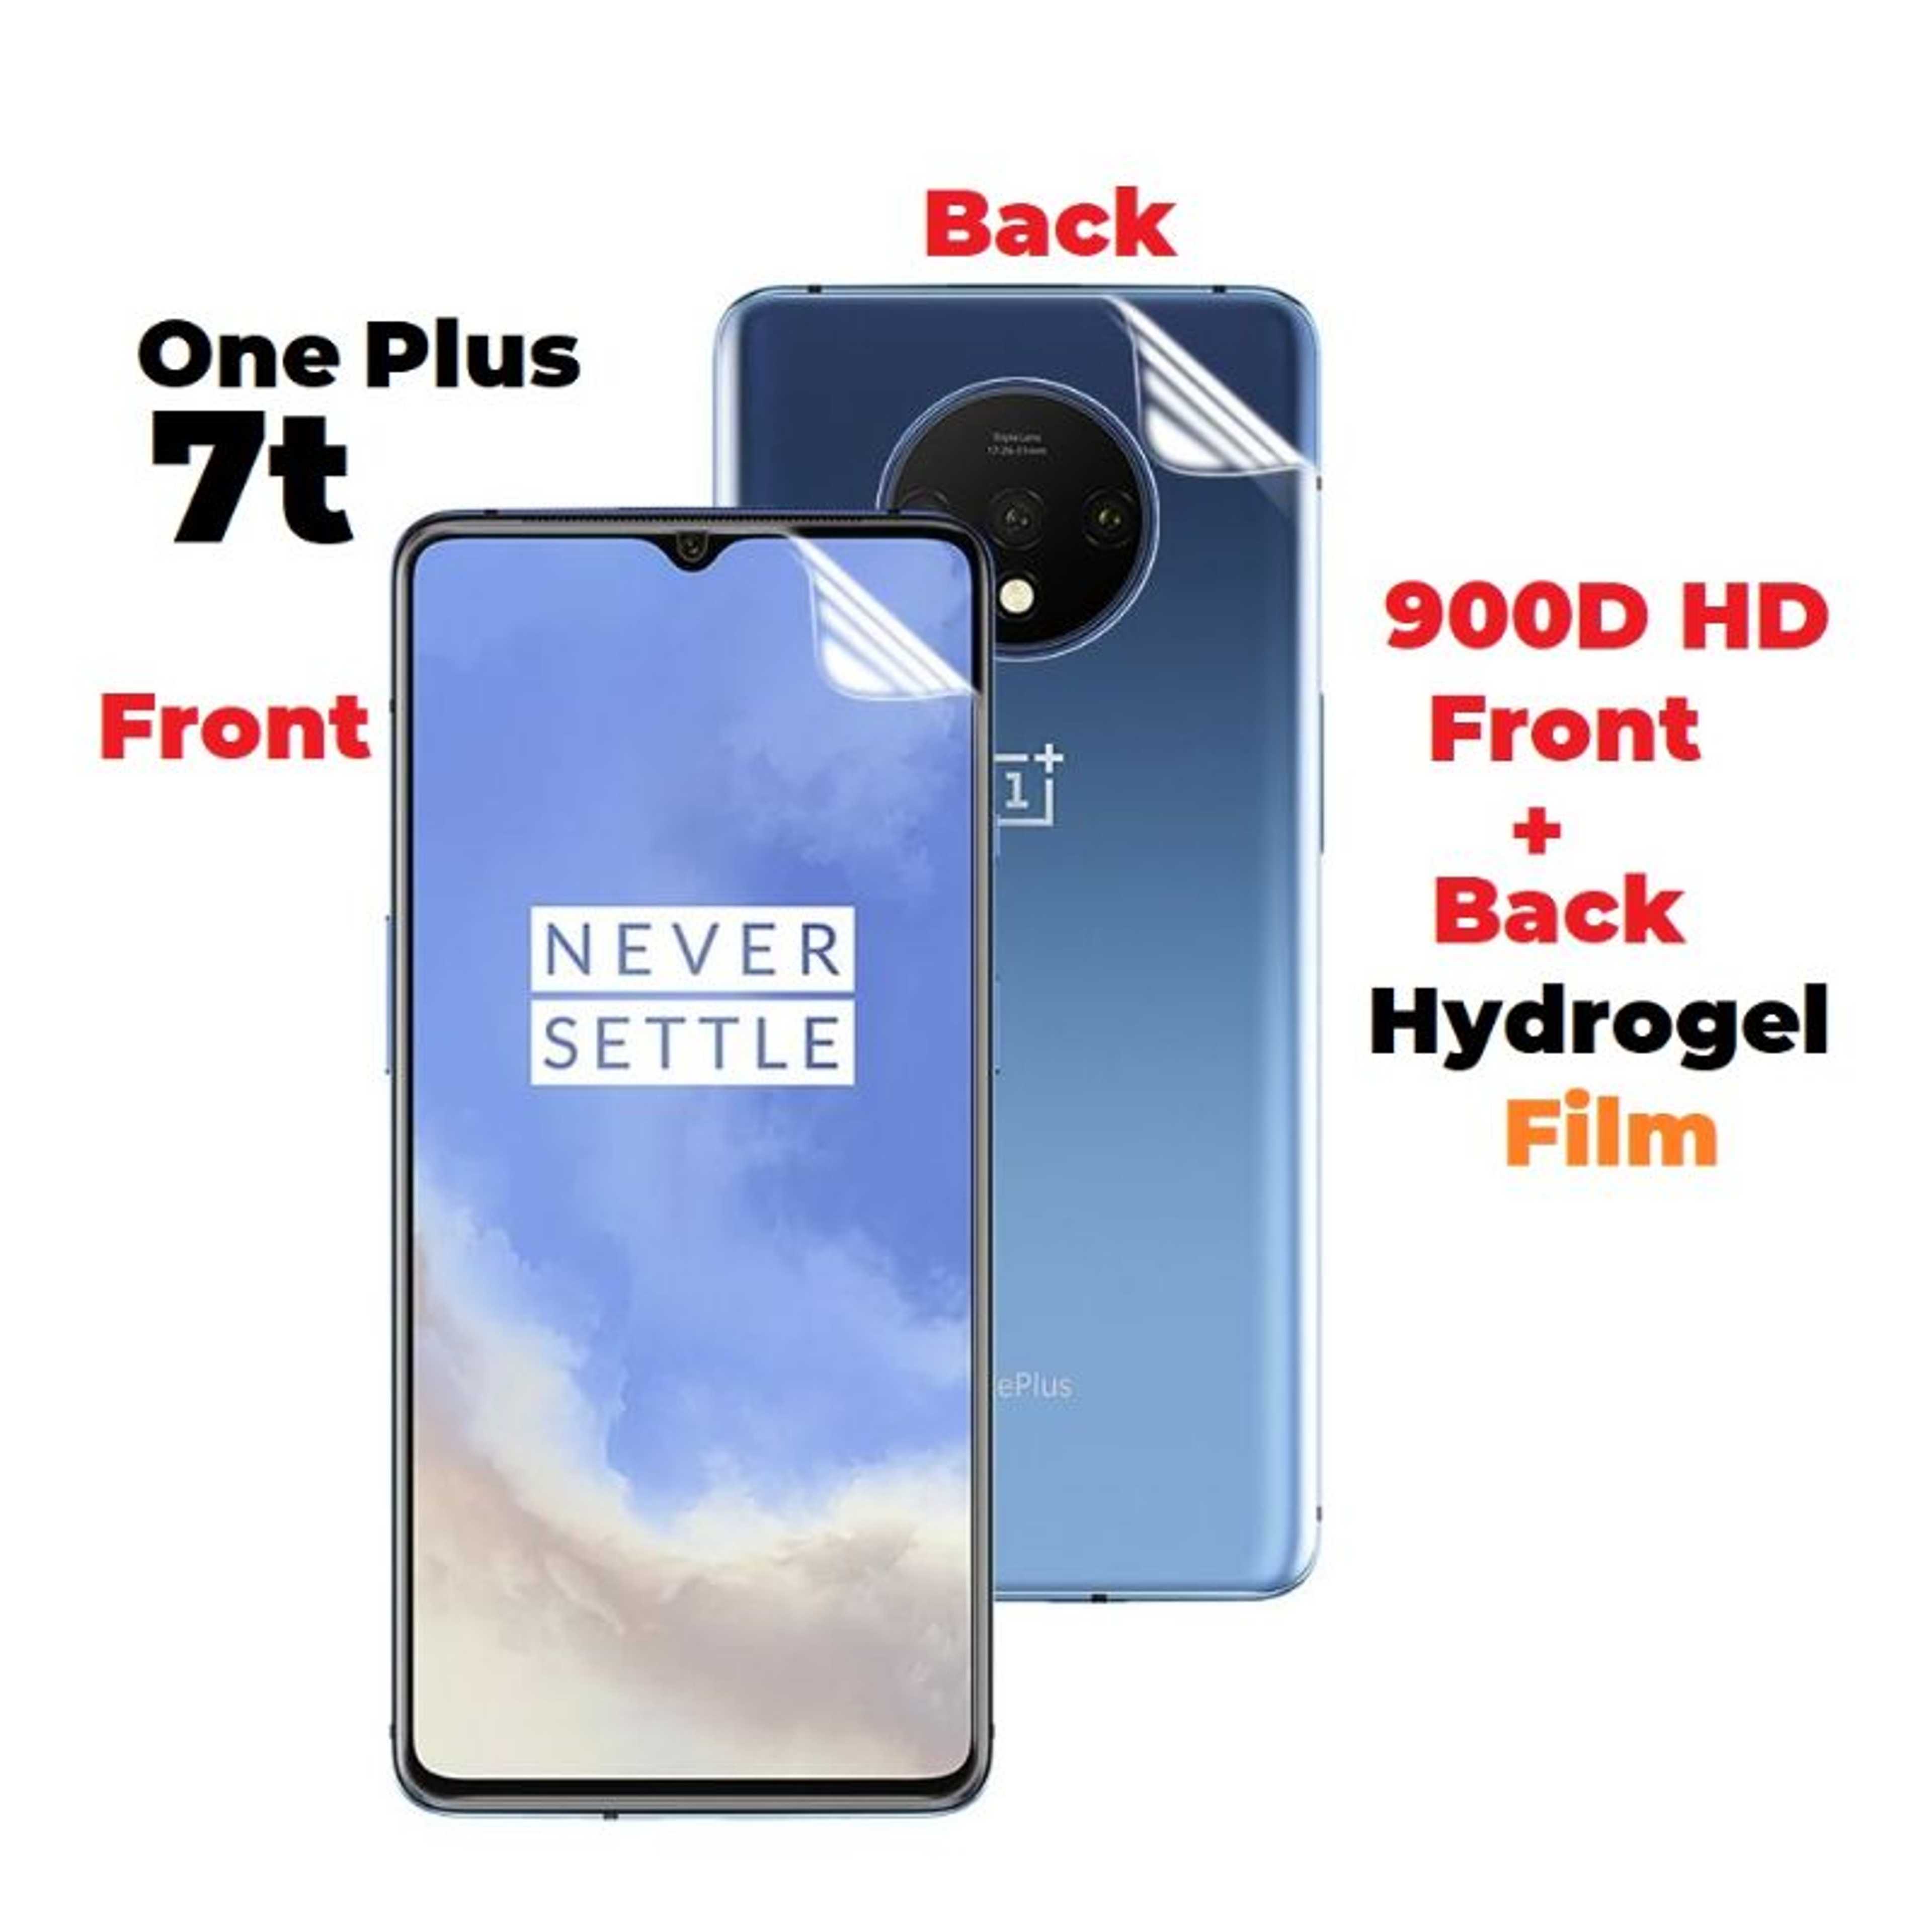 OnePlus 7T Front and Back Hydrogel film Jelly Protector